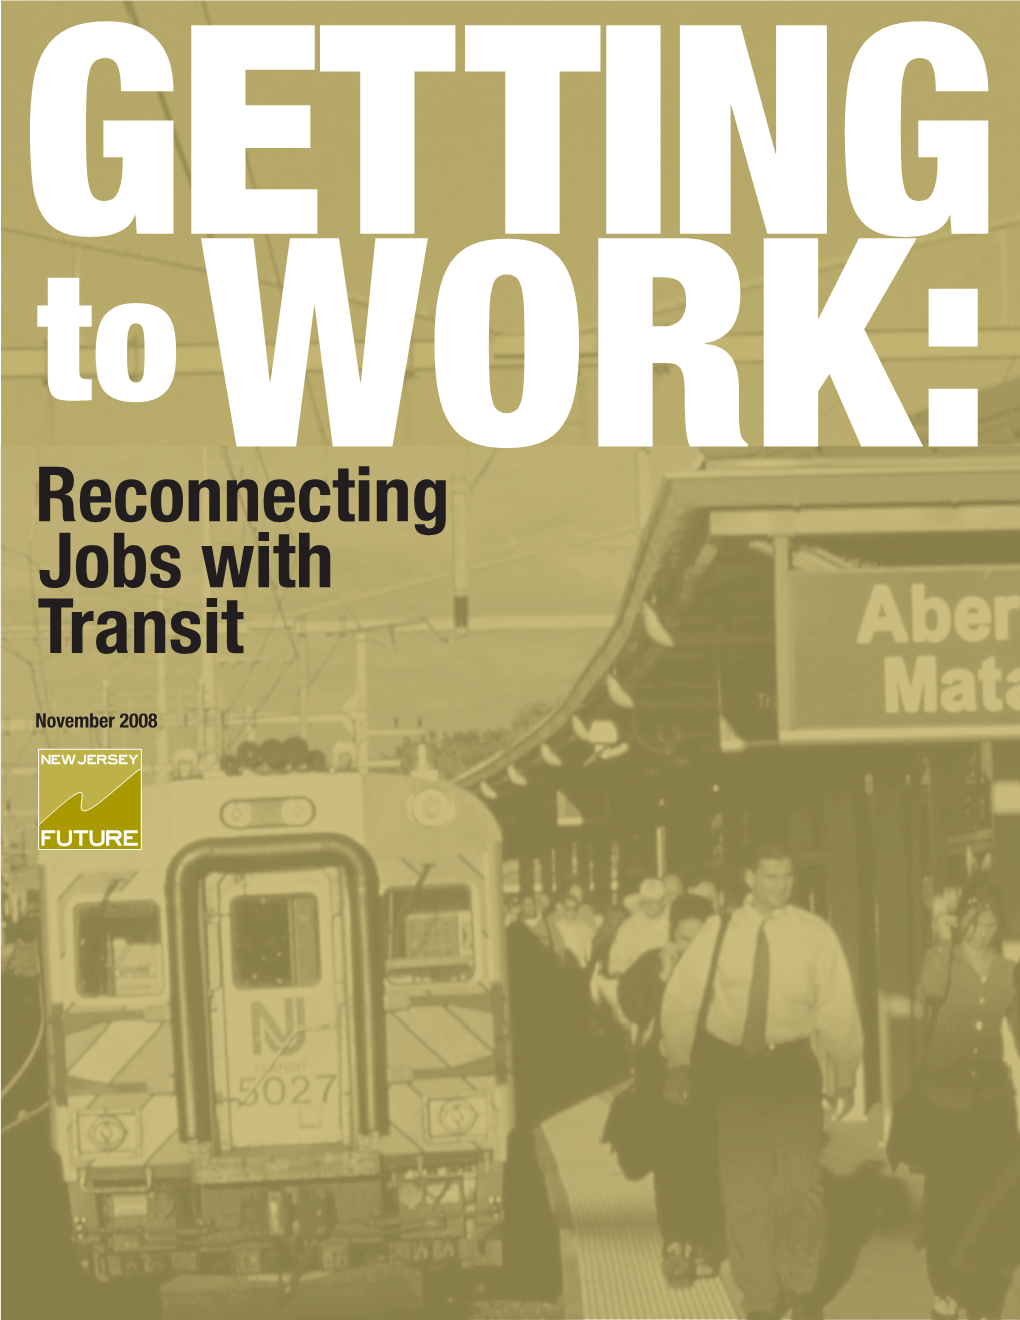 Reconnecting Jobs with Transit